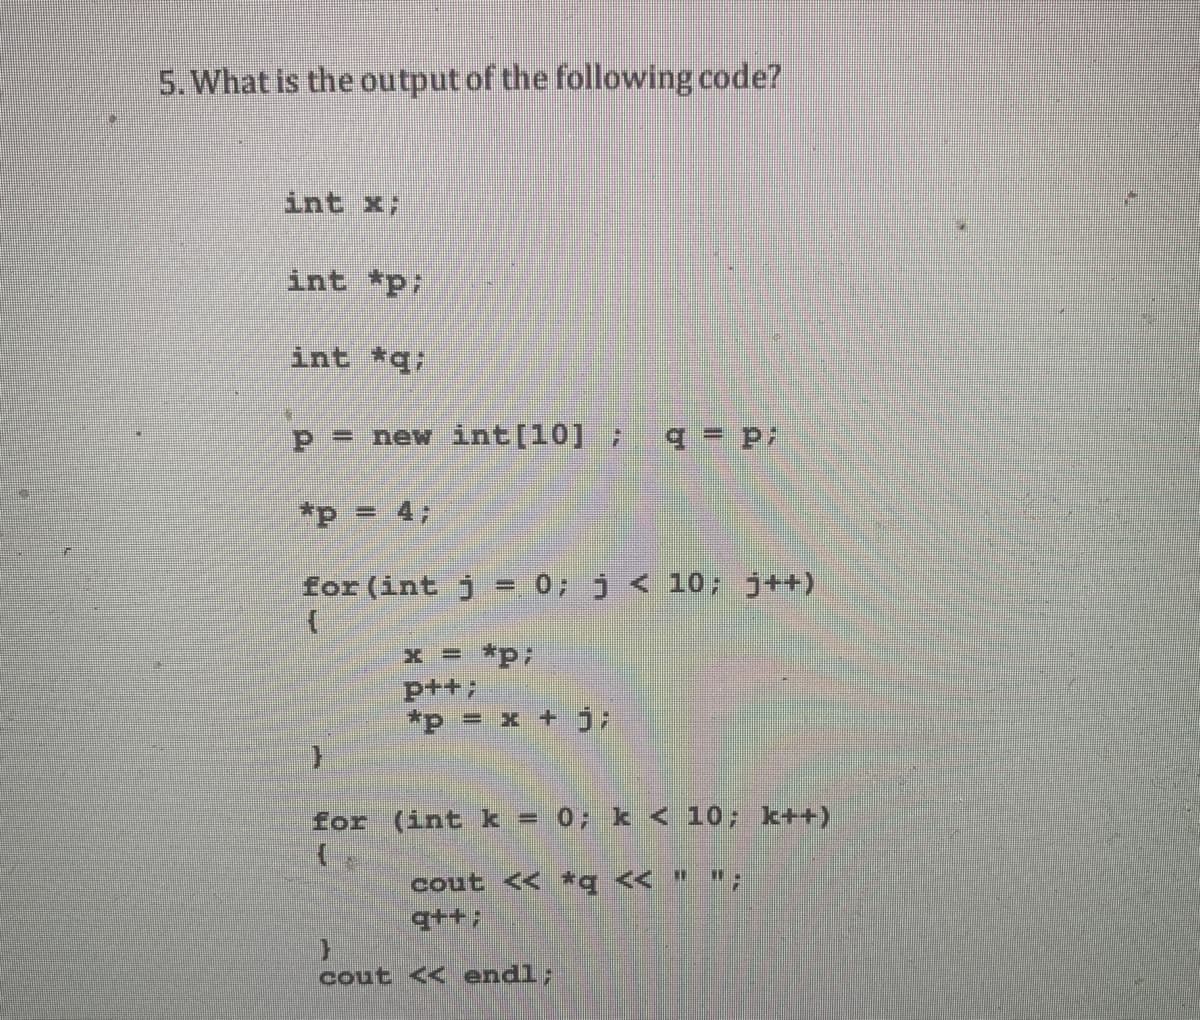 5. What is the output of the following code?
int x;
int *p;
int *q;
P = new int[10] ;
*p = 4;
for (int j = 0; j < 10; j++)
x = *p;
ptt;
*p = x + j;
for (int k = 0; k < 10; k++)
cout << *q < " ";
q++;
cout << endl;
